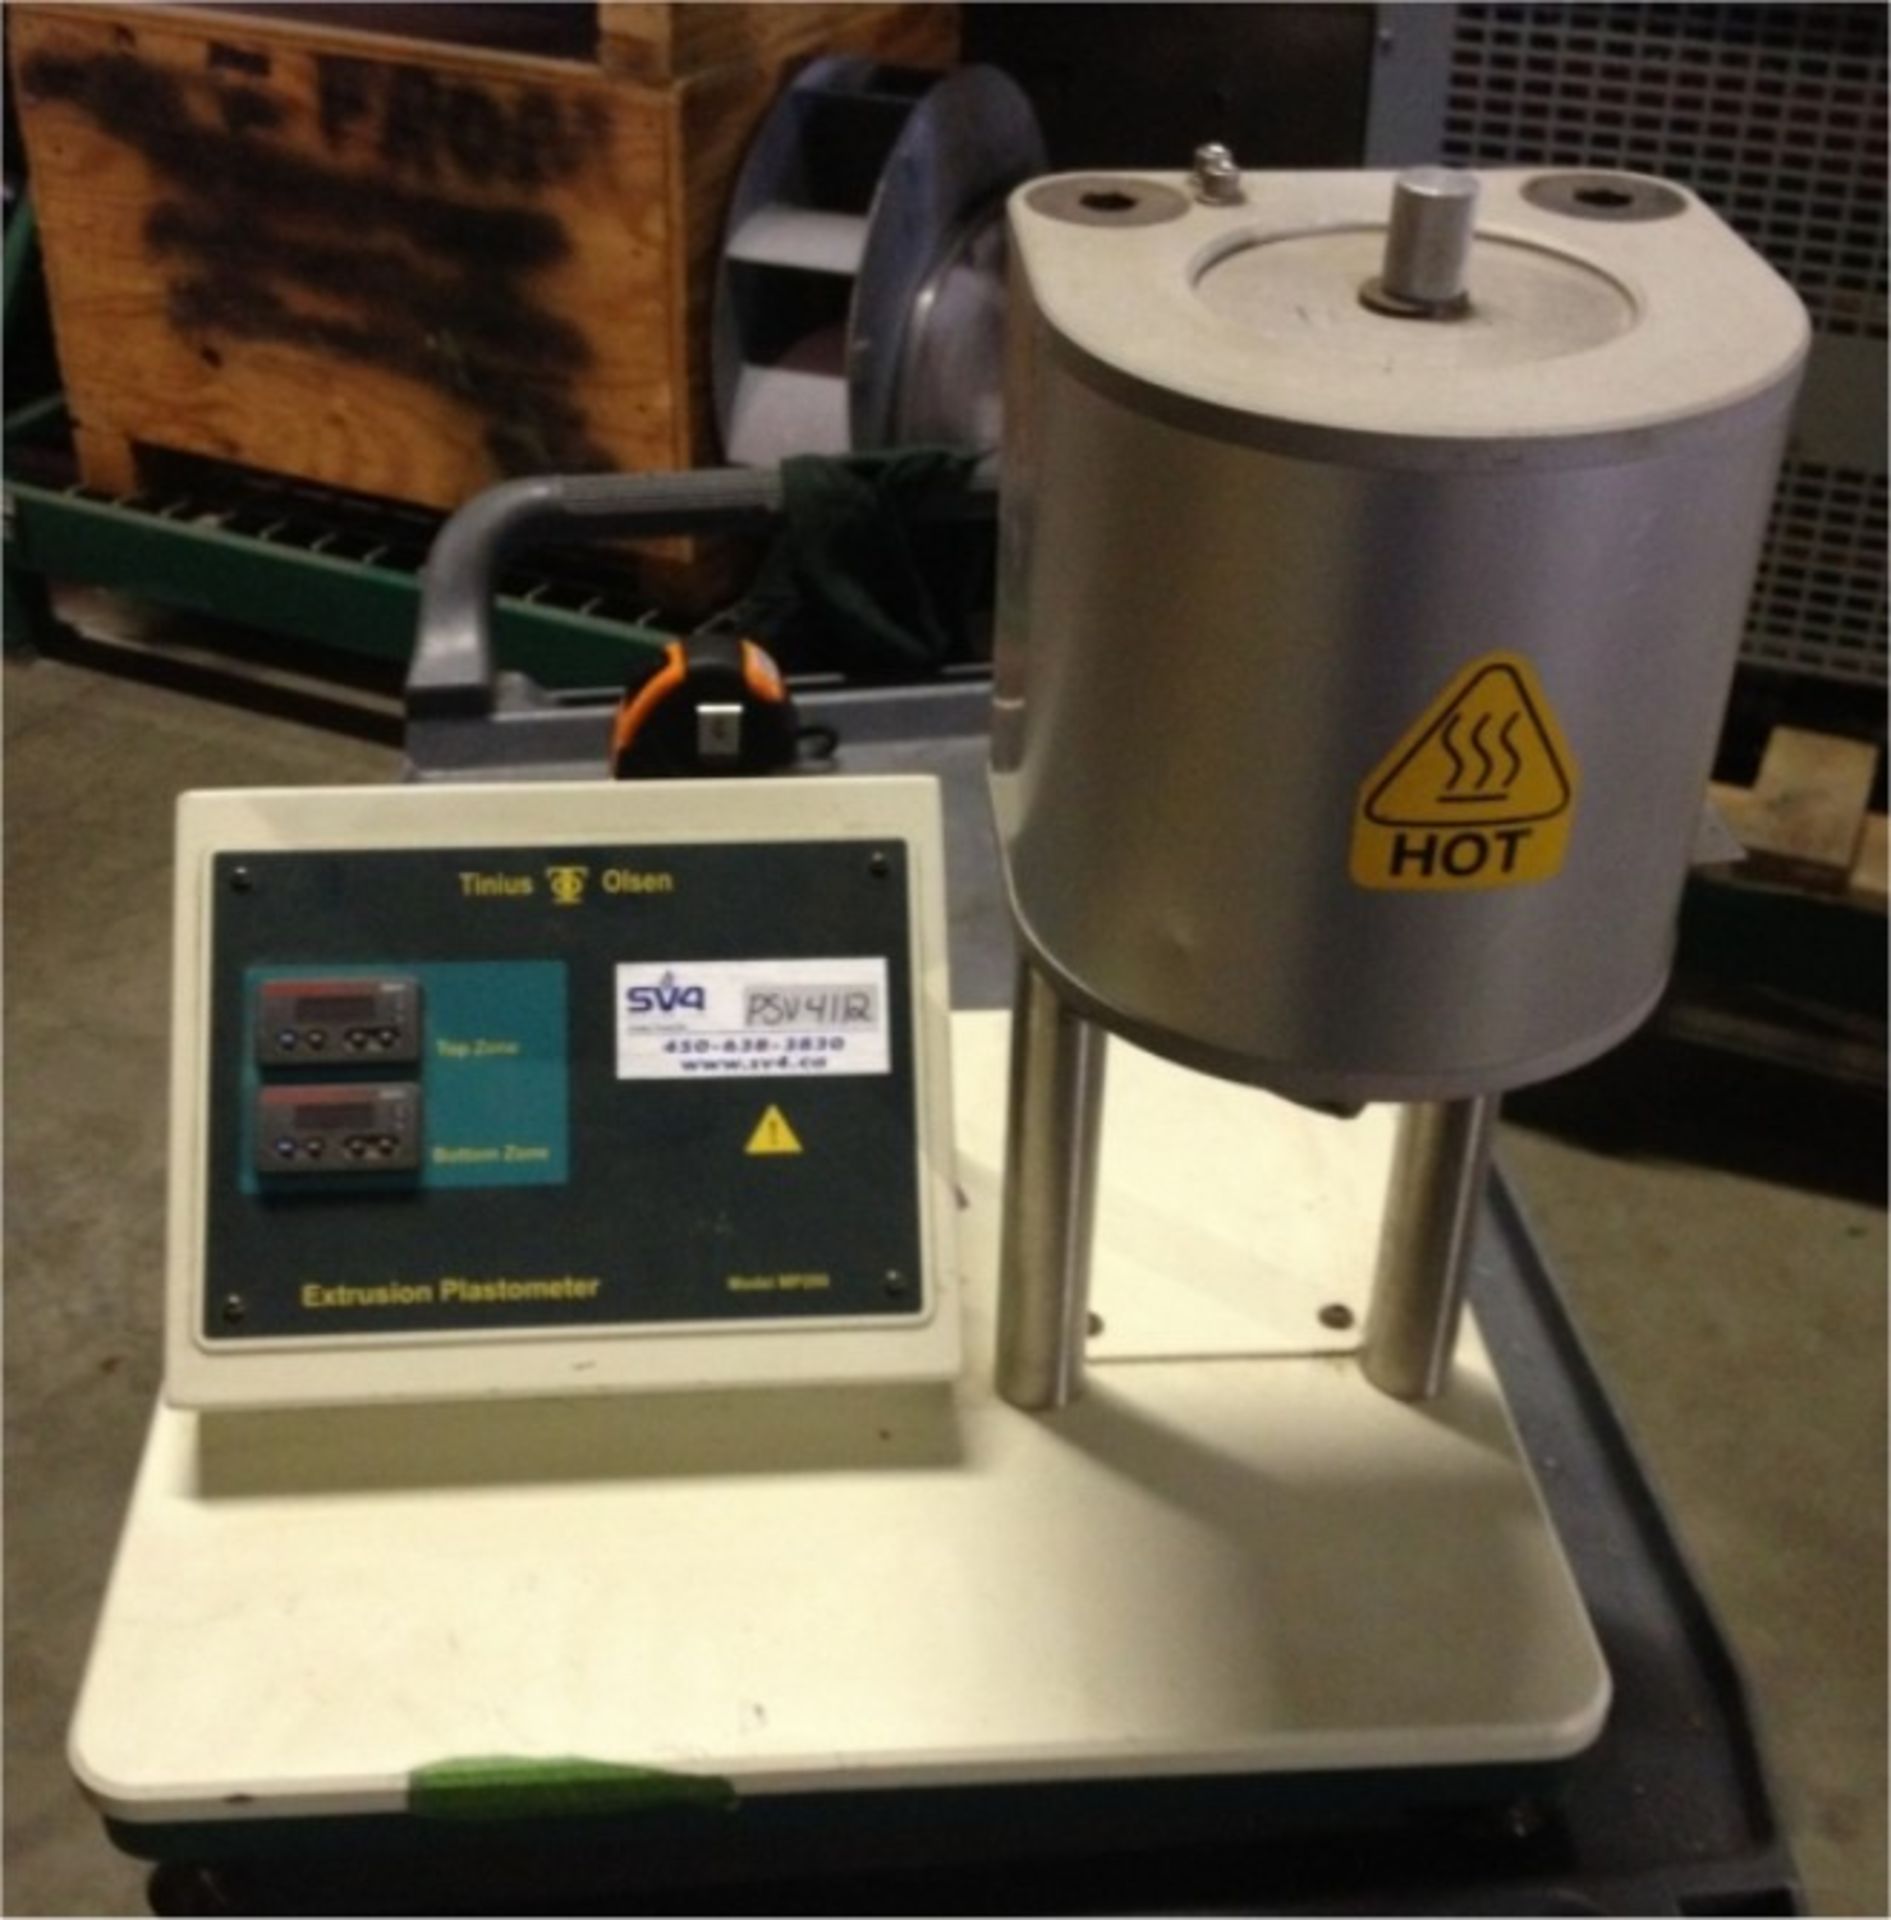 TINUS OLSEN Model MP-600 Extrusion Plastometer (Located in Quebec) LOAD OUT FEE: 50